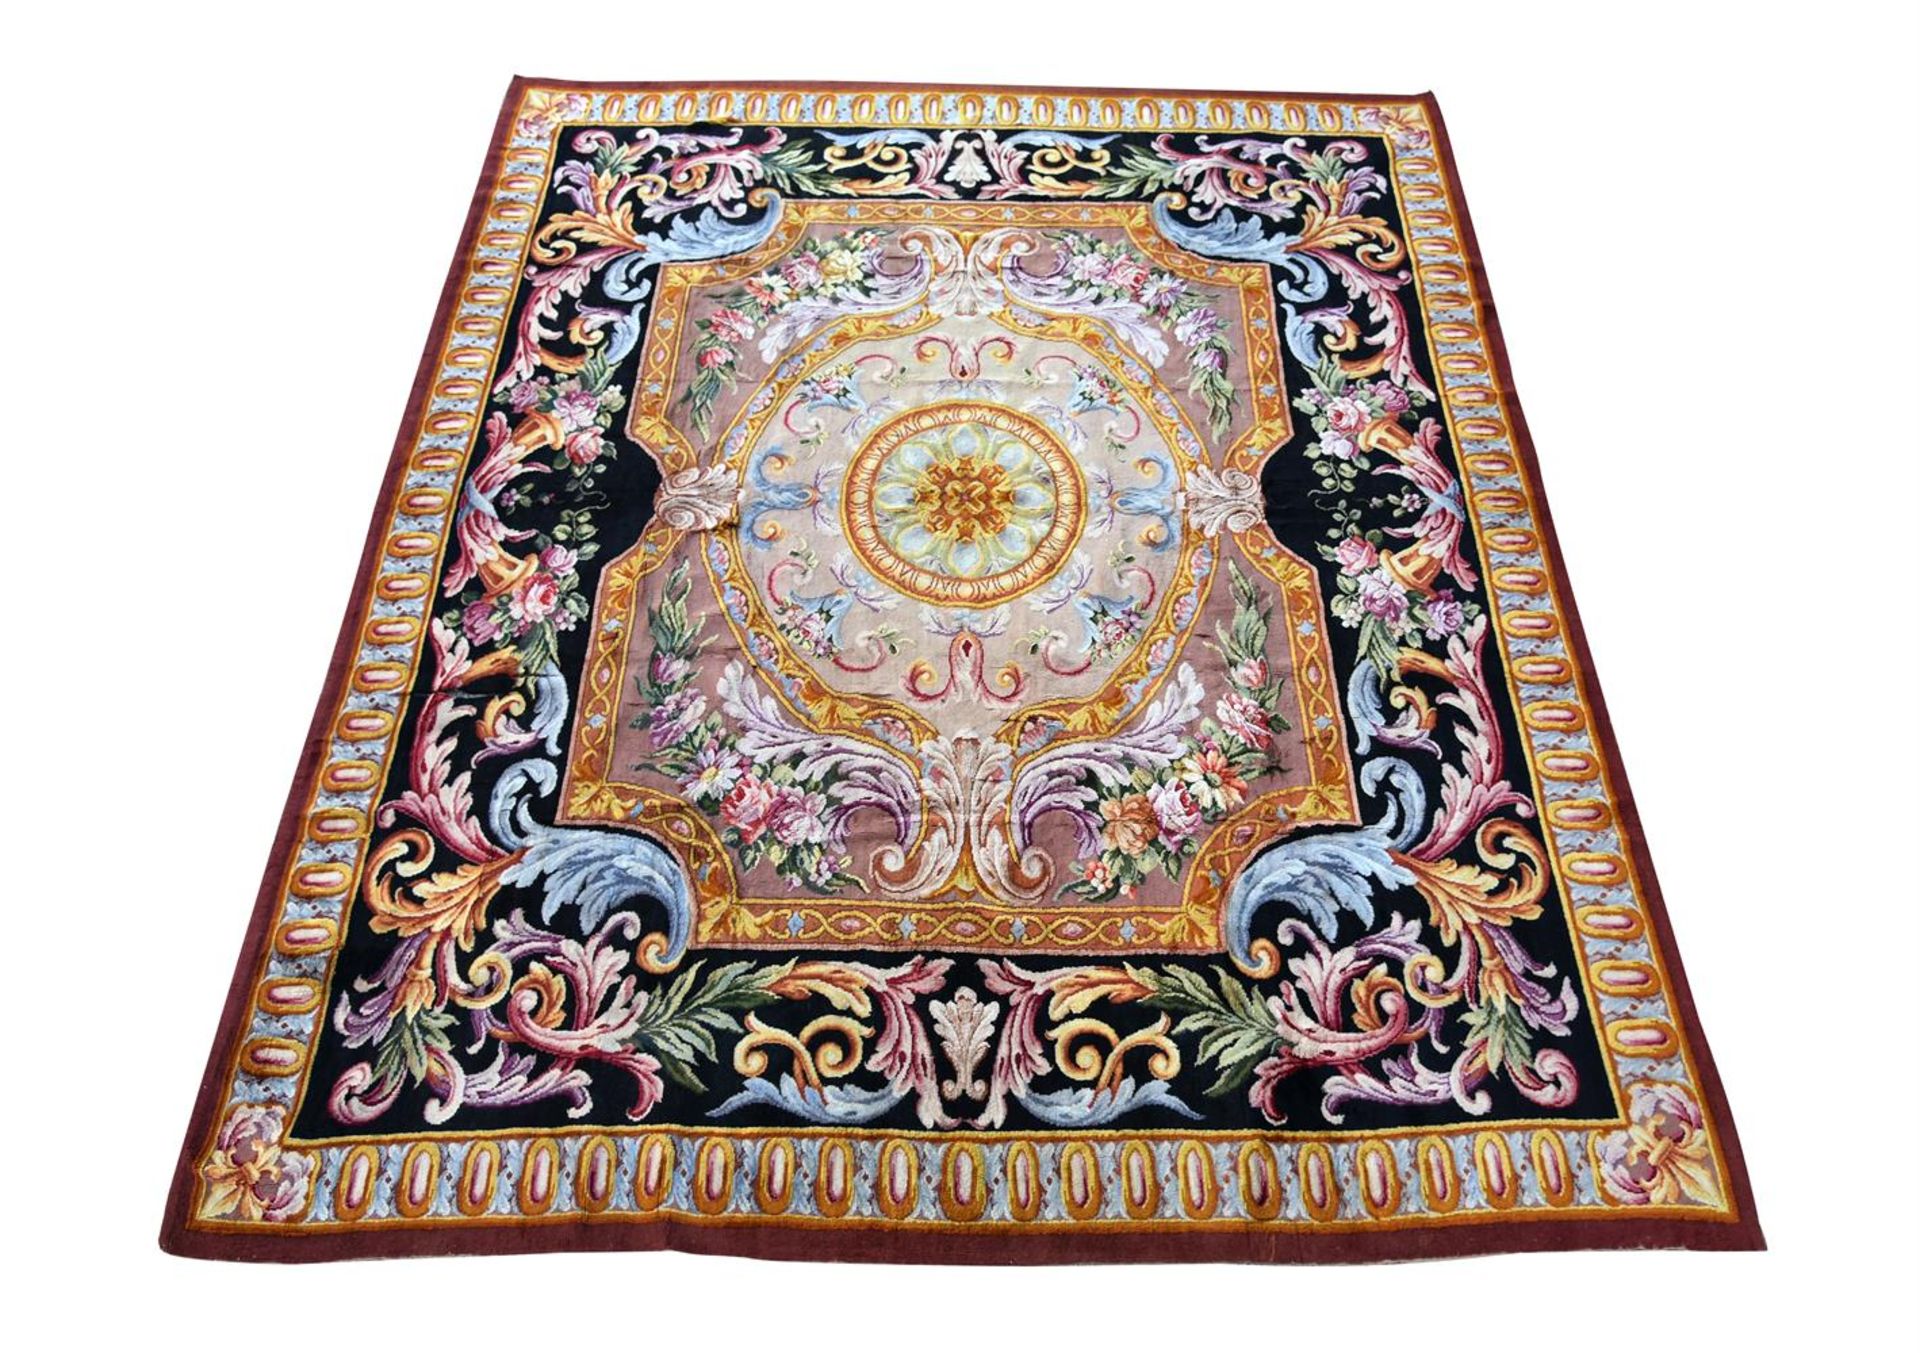 A FRENCH AUBUSSON CARPET, approximately 417 x 359cm